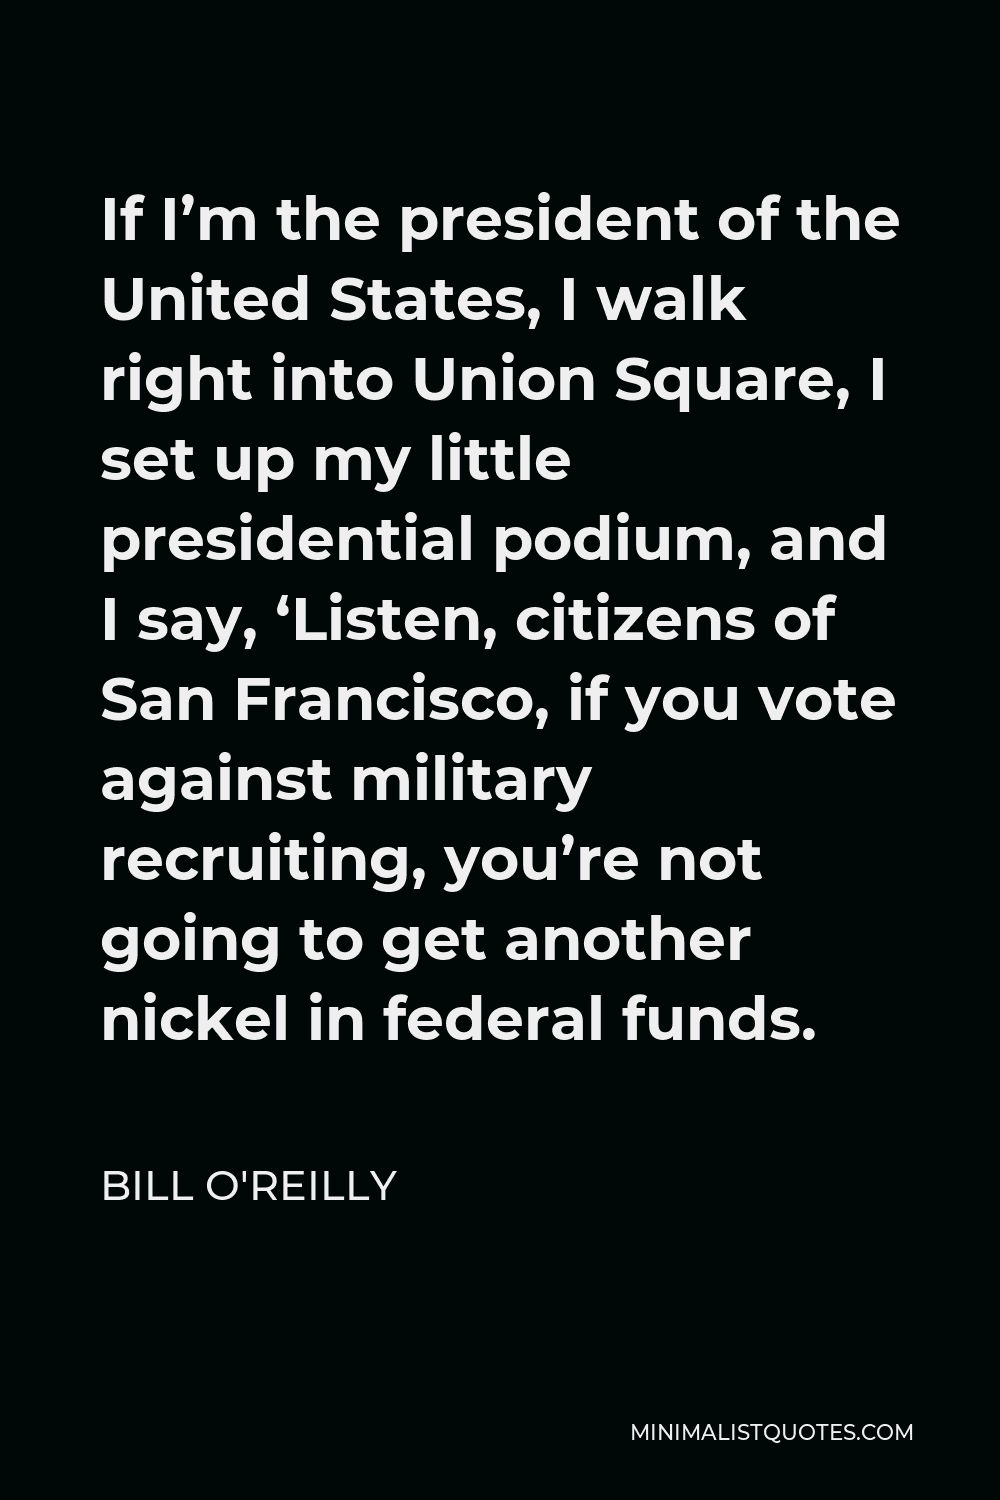 Bill O'Reilly Quote - If I’m the president of the United States, I walk right into Union Square, I set up my little presidential podium, and I say, ‘Listen, citizens of San Francisco, if you vote against military recruiting, you’re not going to get another nickel in federal funds.